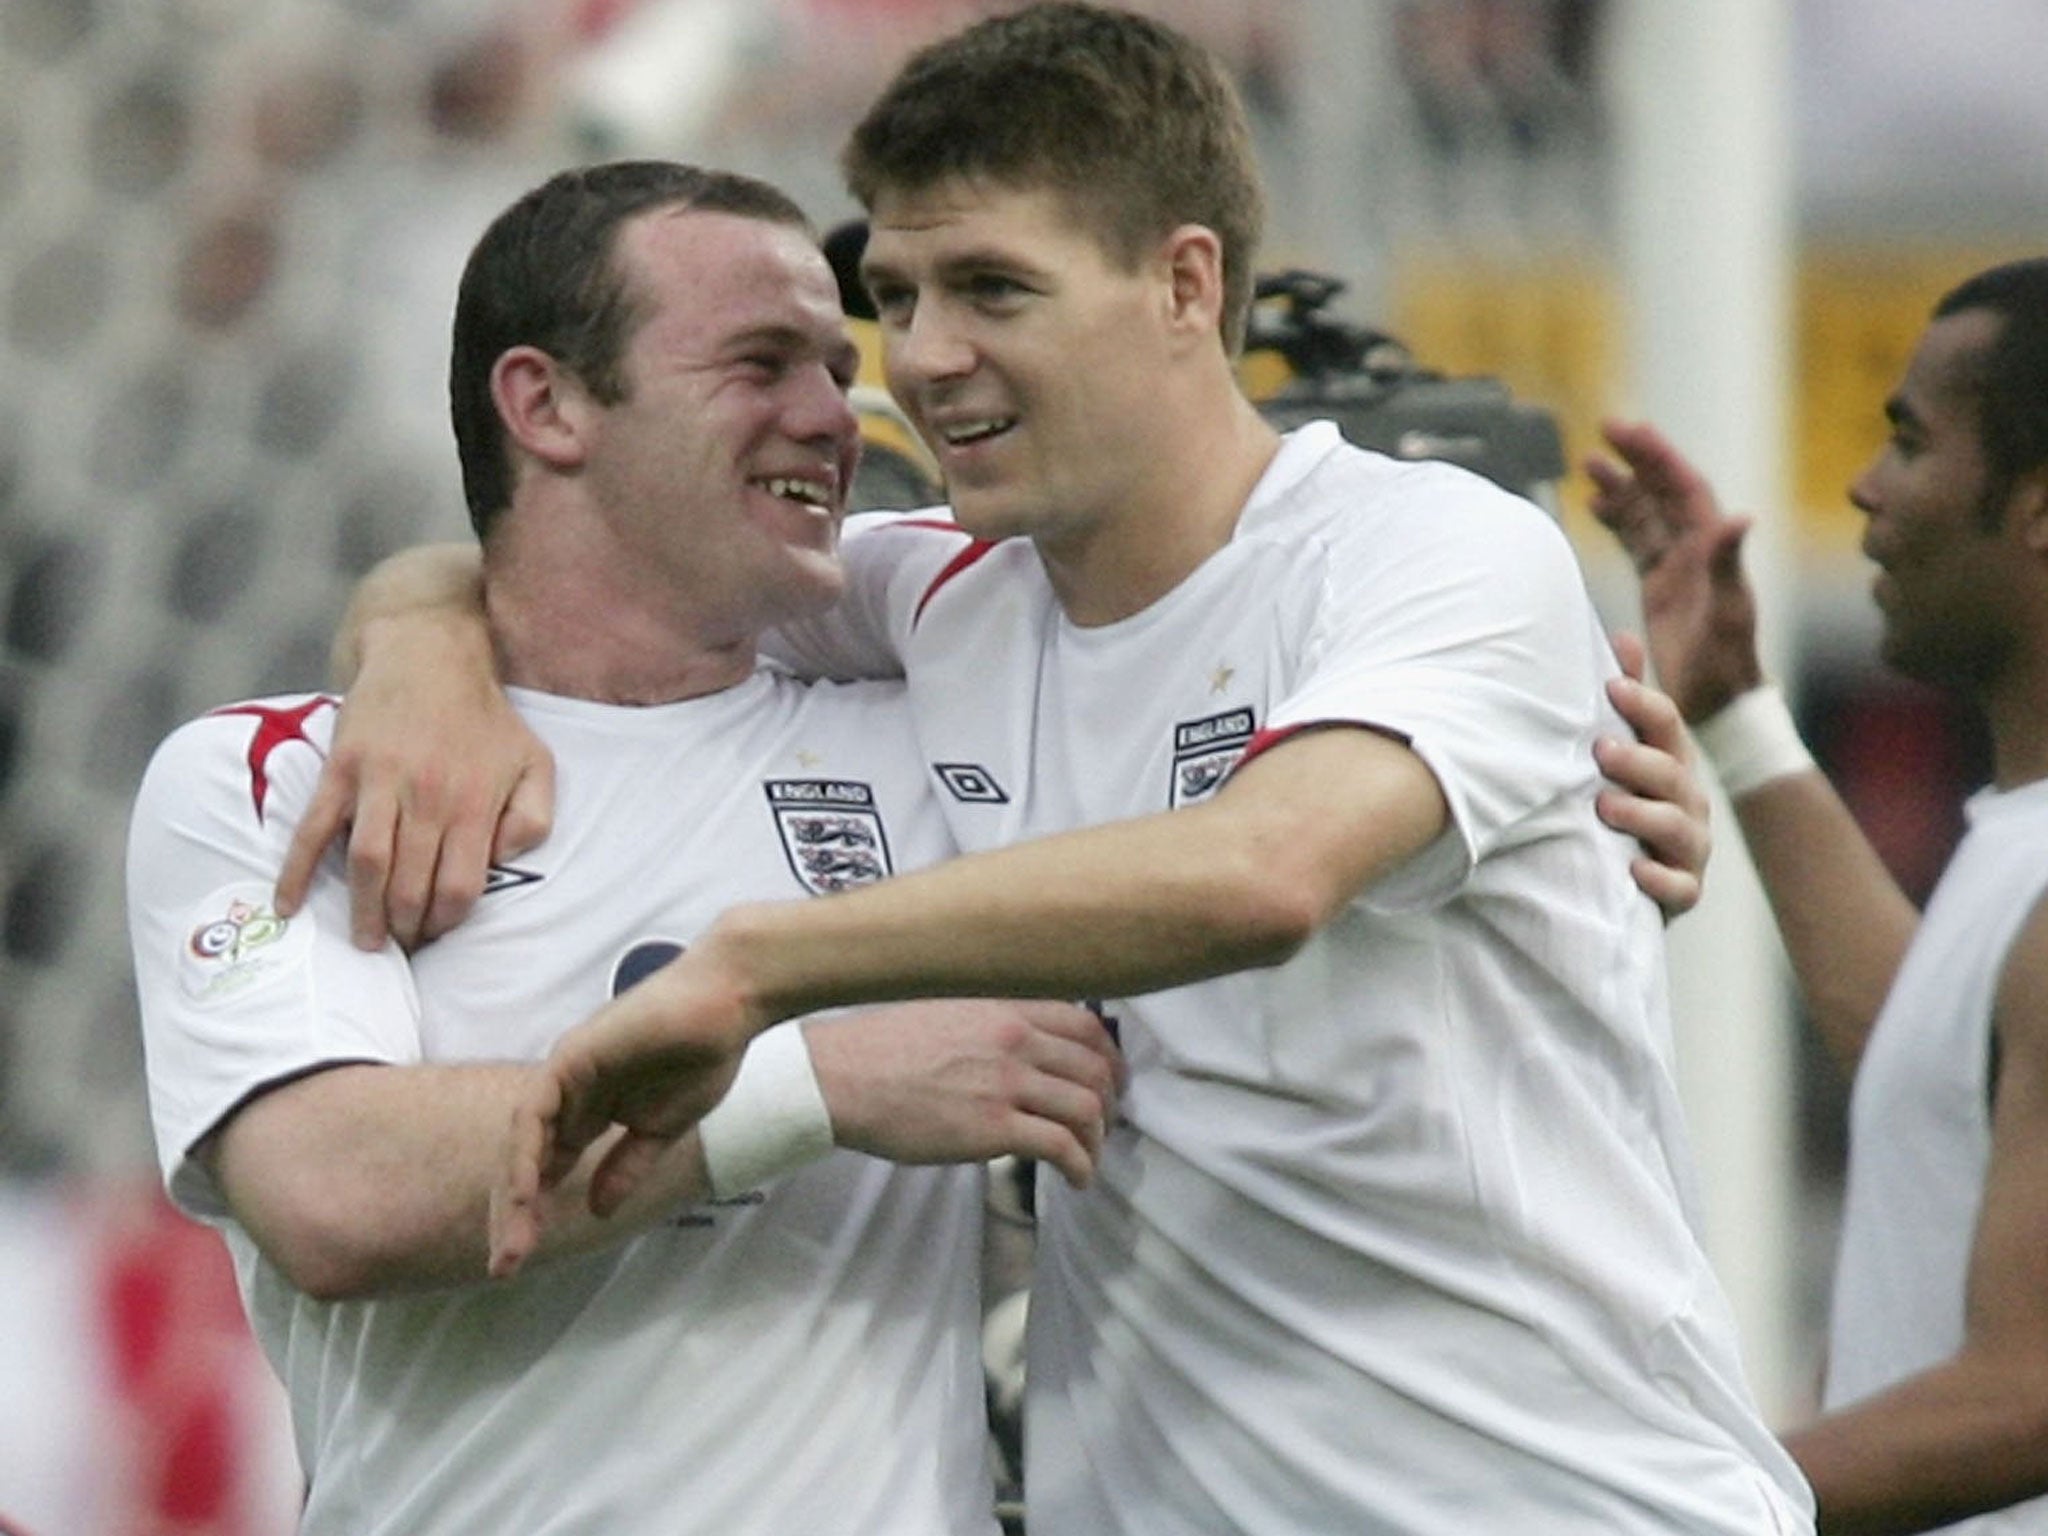 Wayne Rooney (left) and Steven Gerrard celebrate England’s victory over Trinidad and Tobago at the 2006 World Cup in Germany